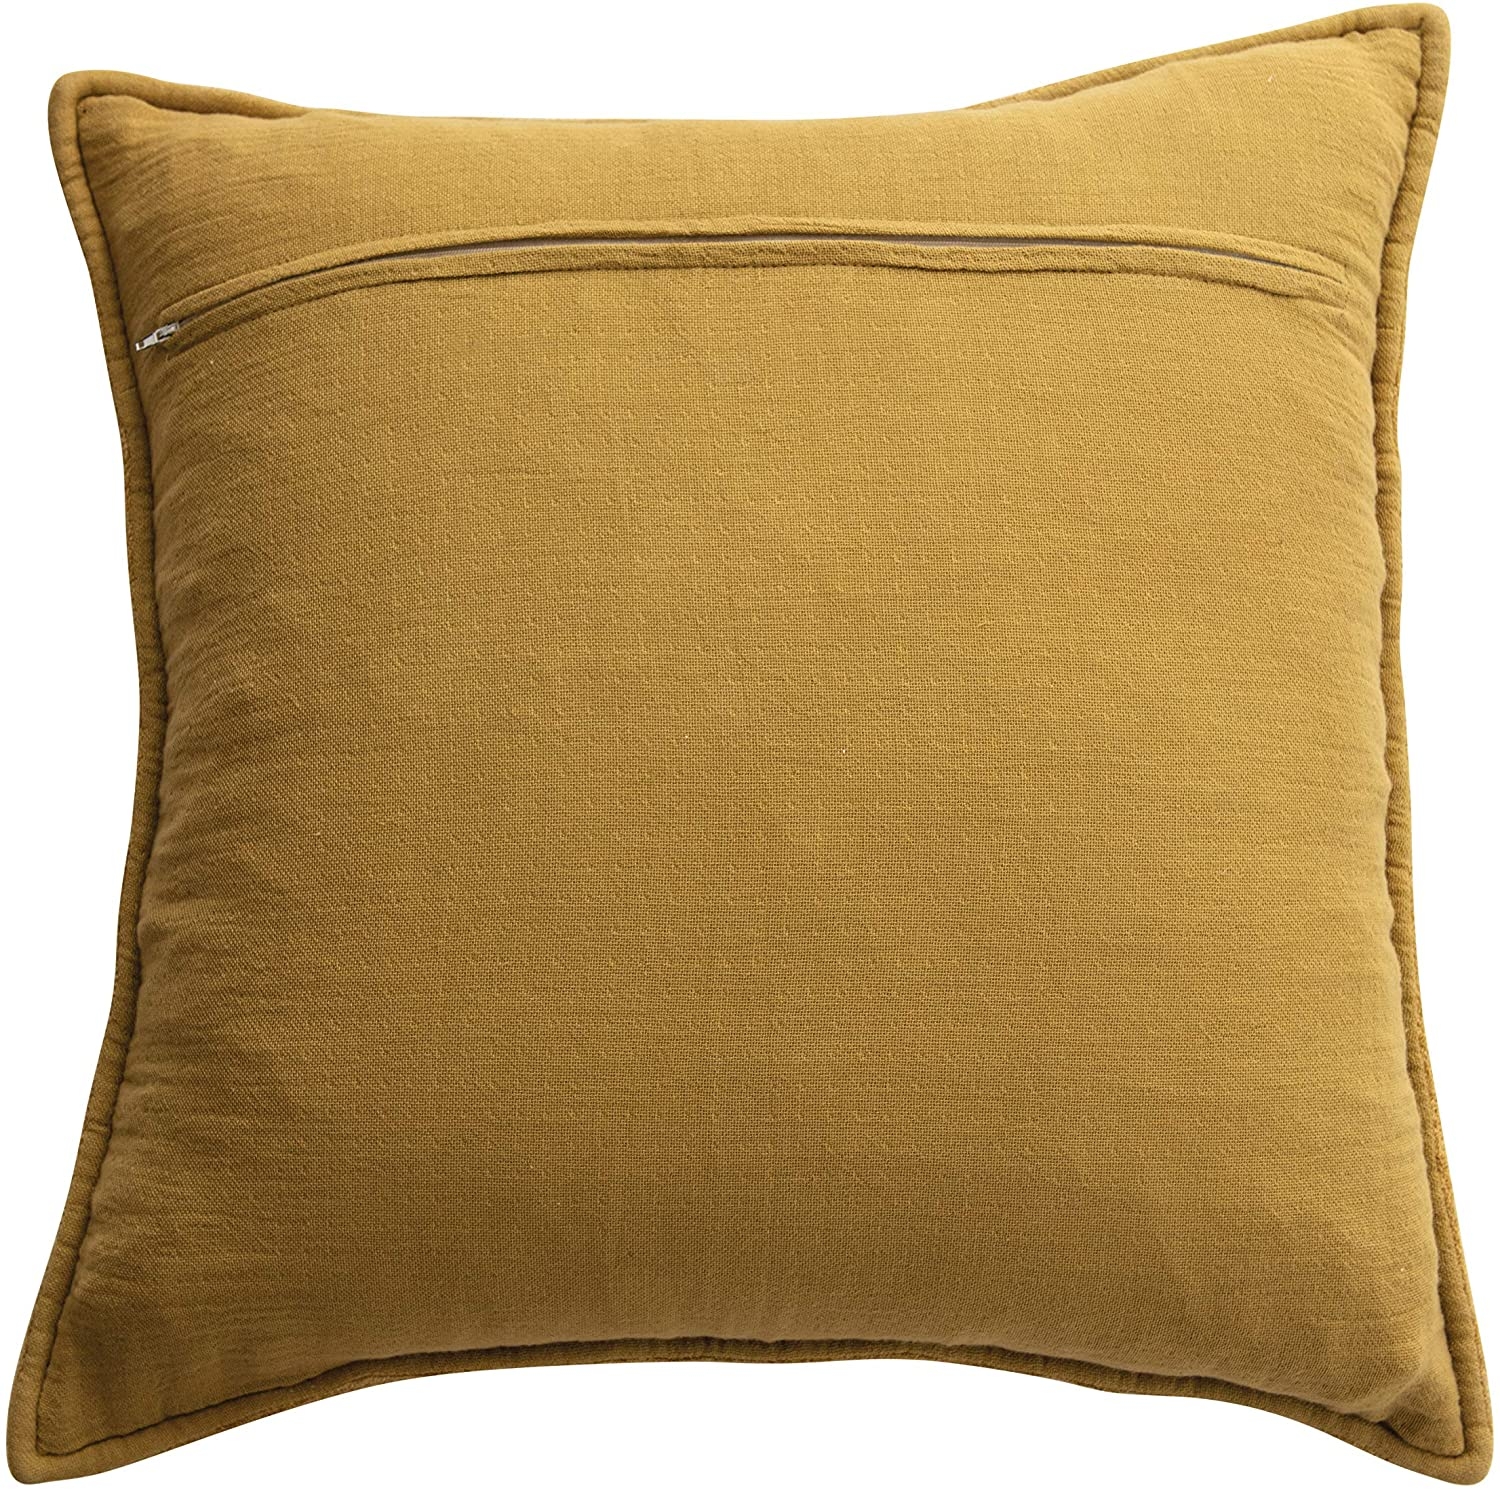 Square Mustard Quilted Cotton Chenille Pillow - Image 1